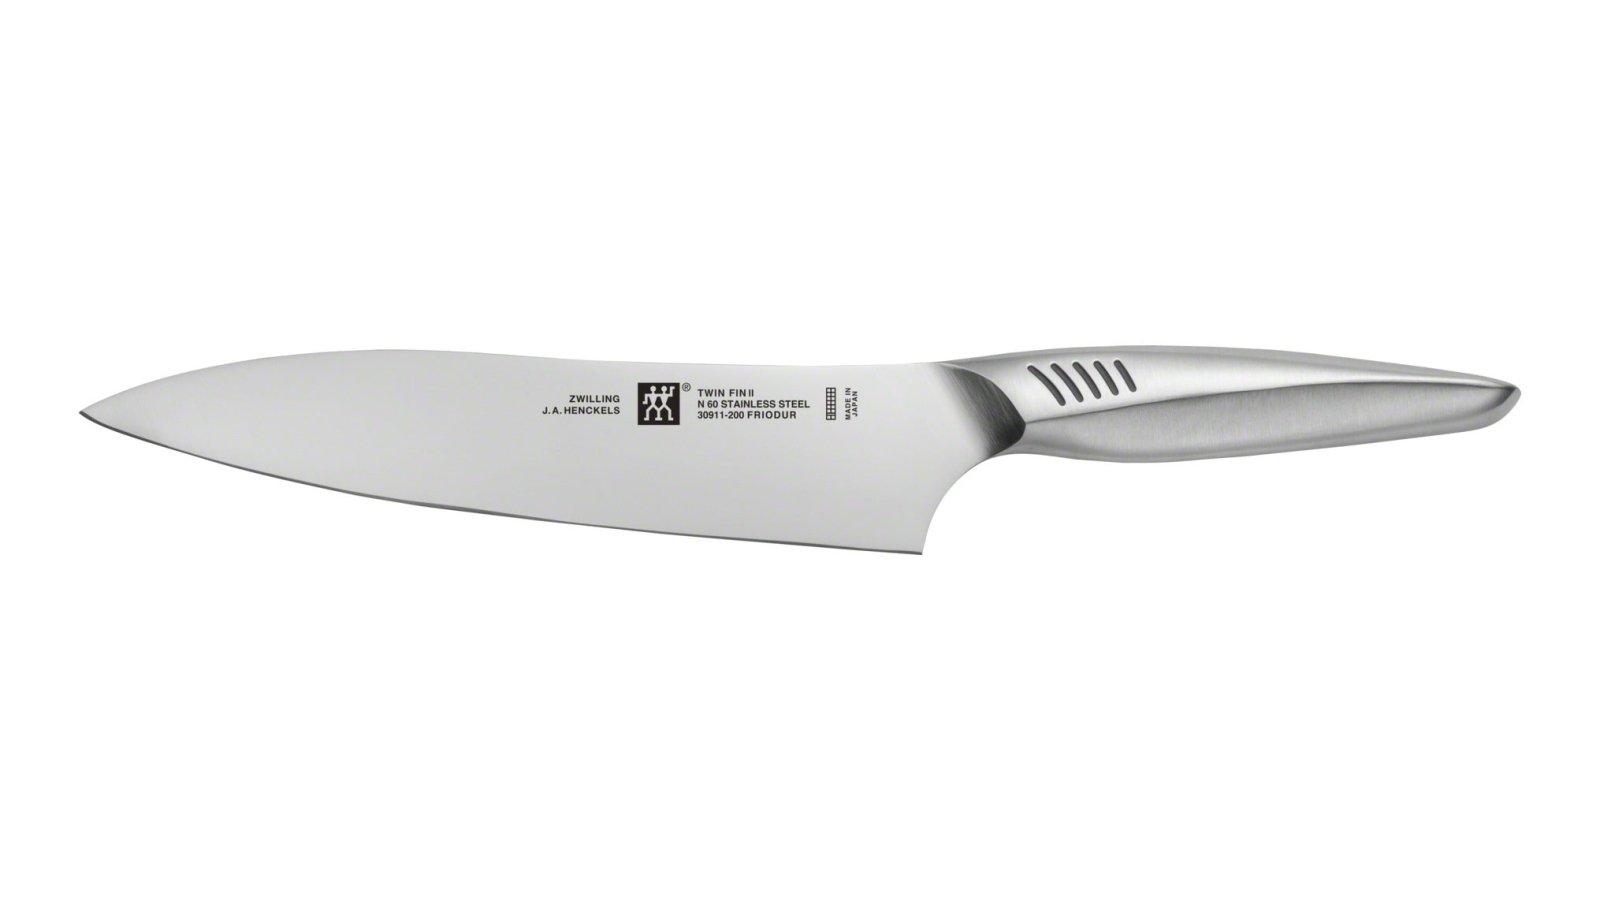 ZWILLING® TWIN Fin II 20cm Chef's Knife - 309112010 - The Cotswold Knife Company